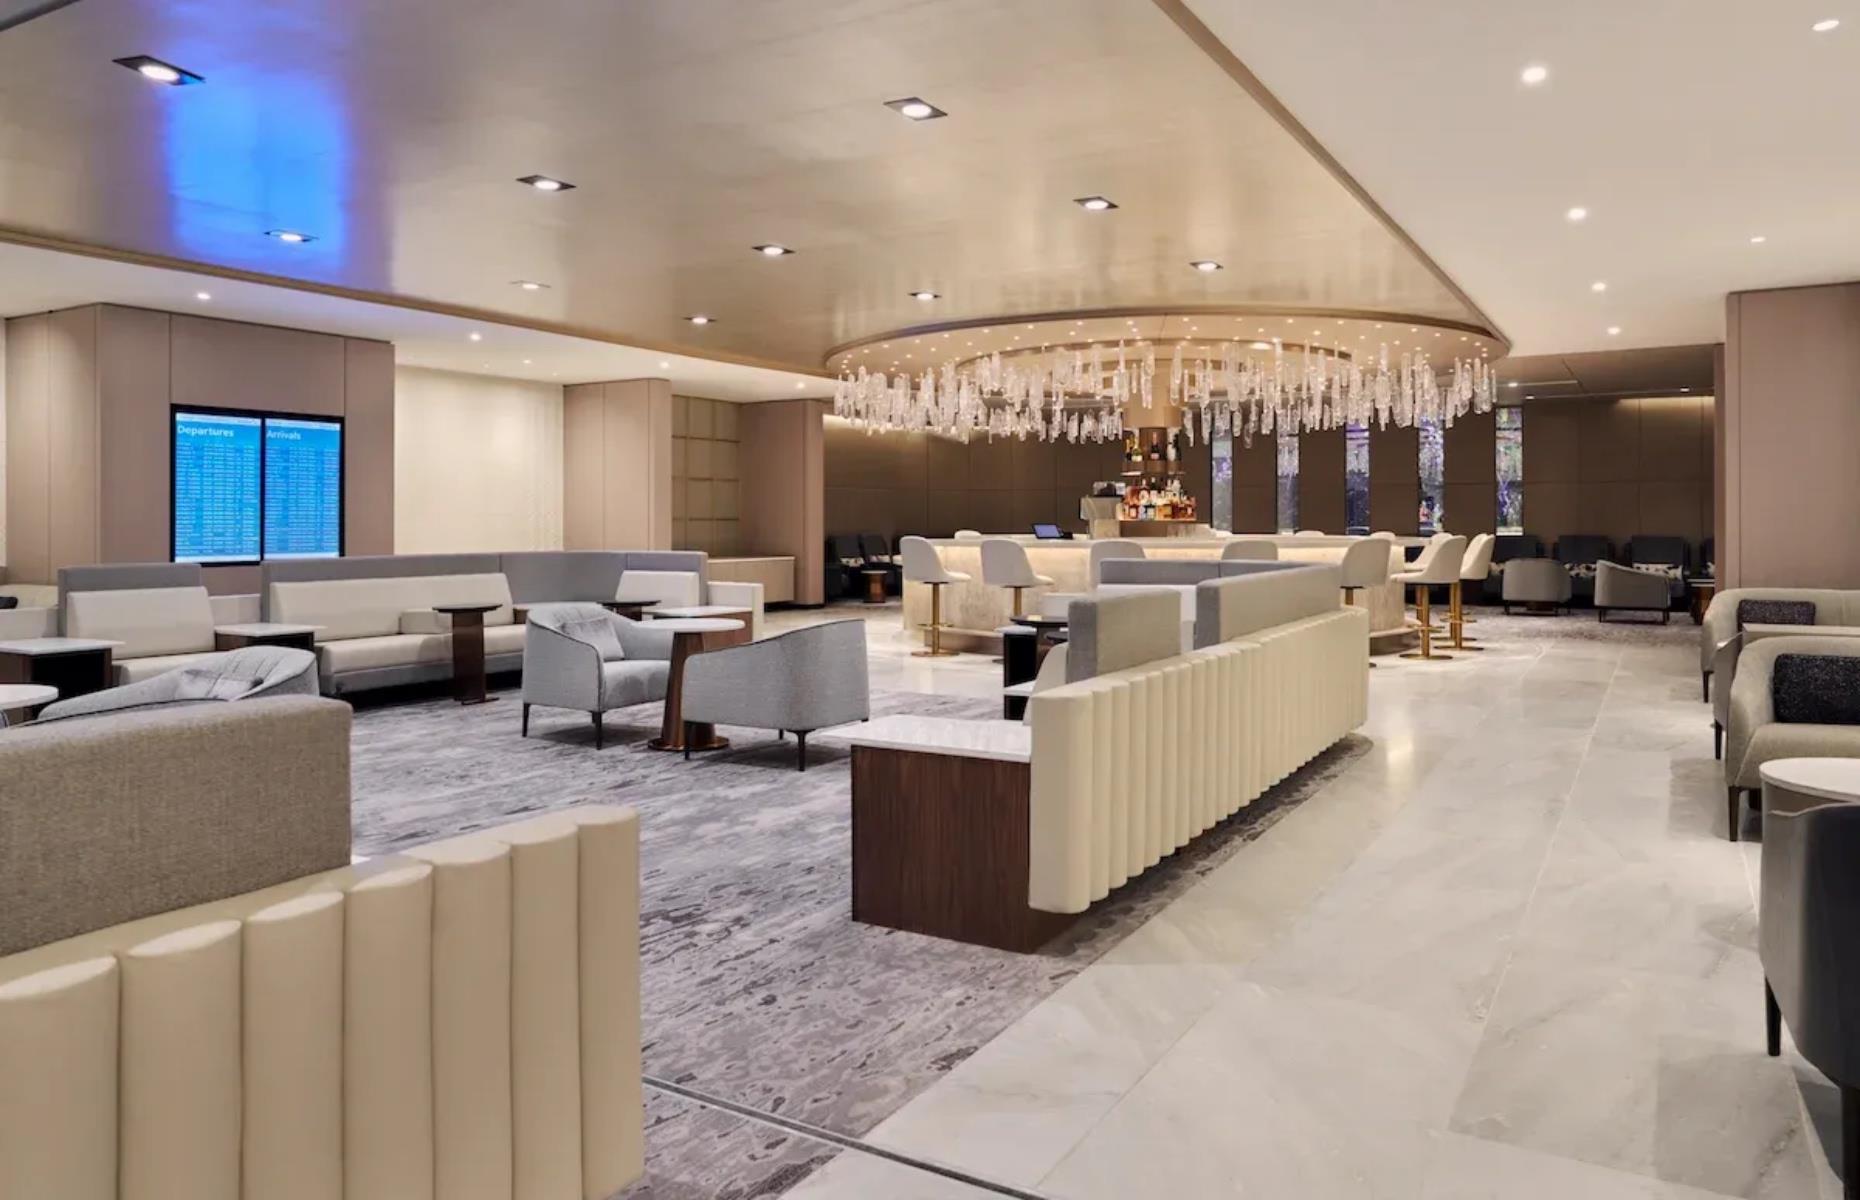 The top-tier Chelsea Lounge is designed to be pure luxe, with the finest furnishings, crystal chandeliers, and high-end amenities. There are marble bathrooms with showers and luxury toiletries to freshen up and a softly lit area with chaise longues where you can take a rest.